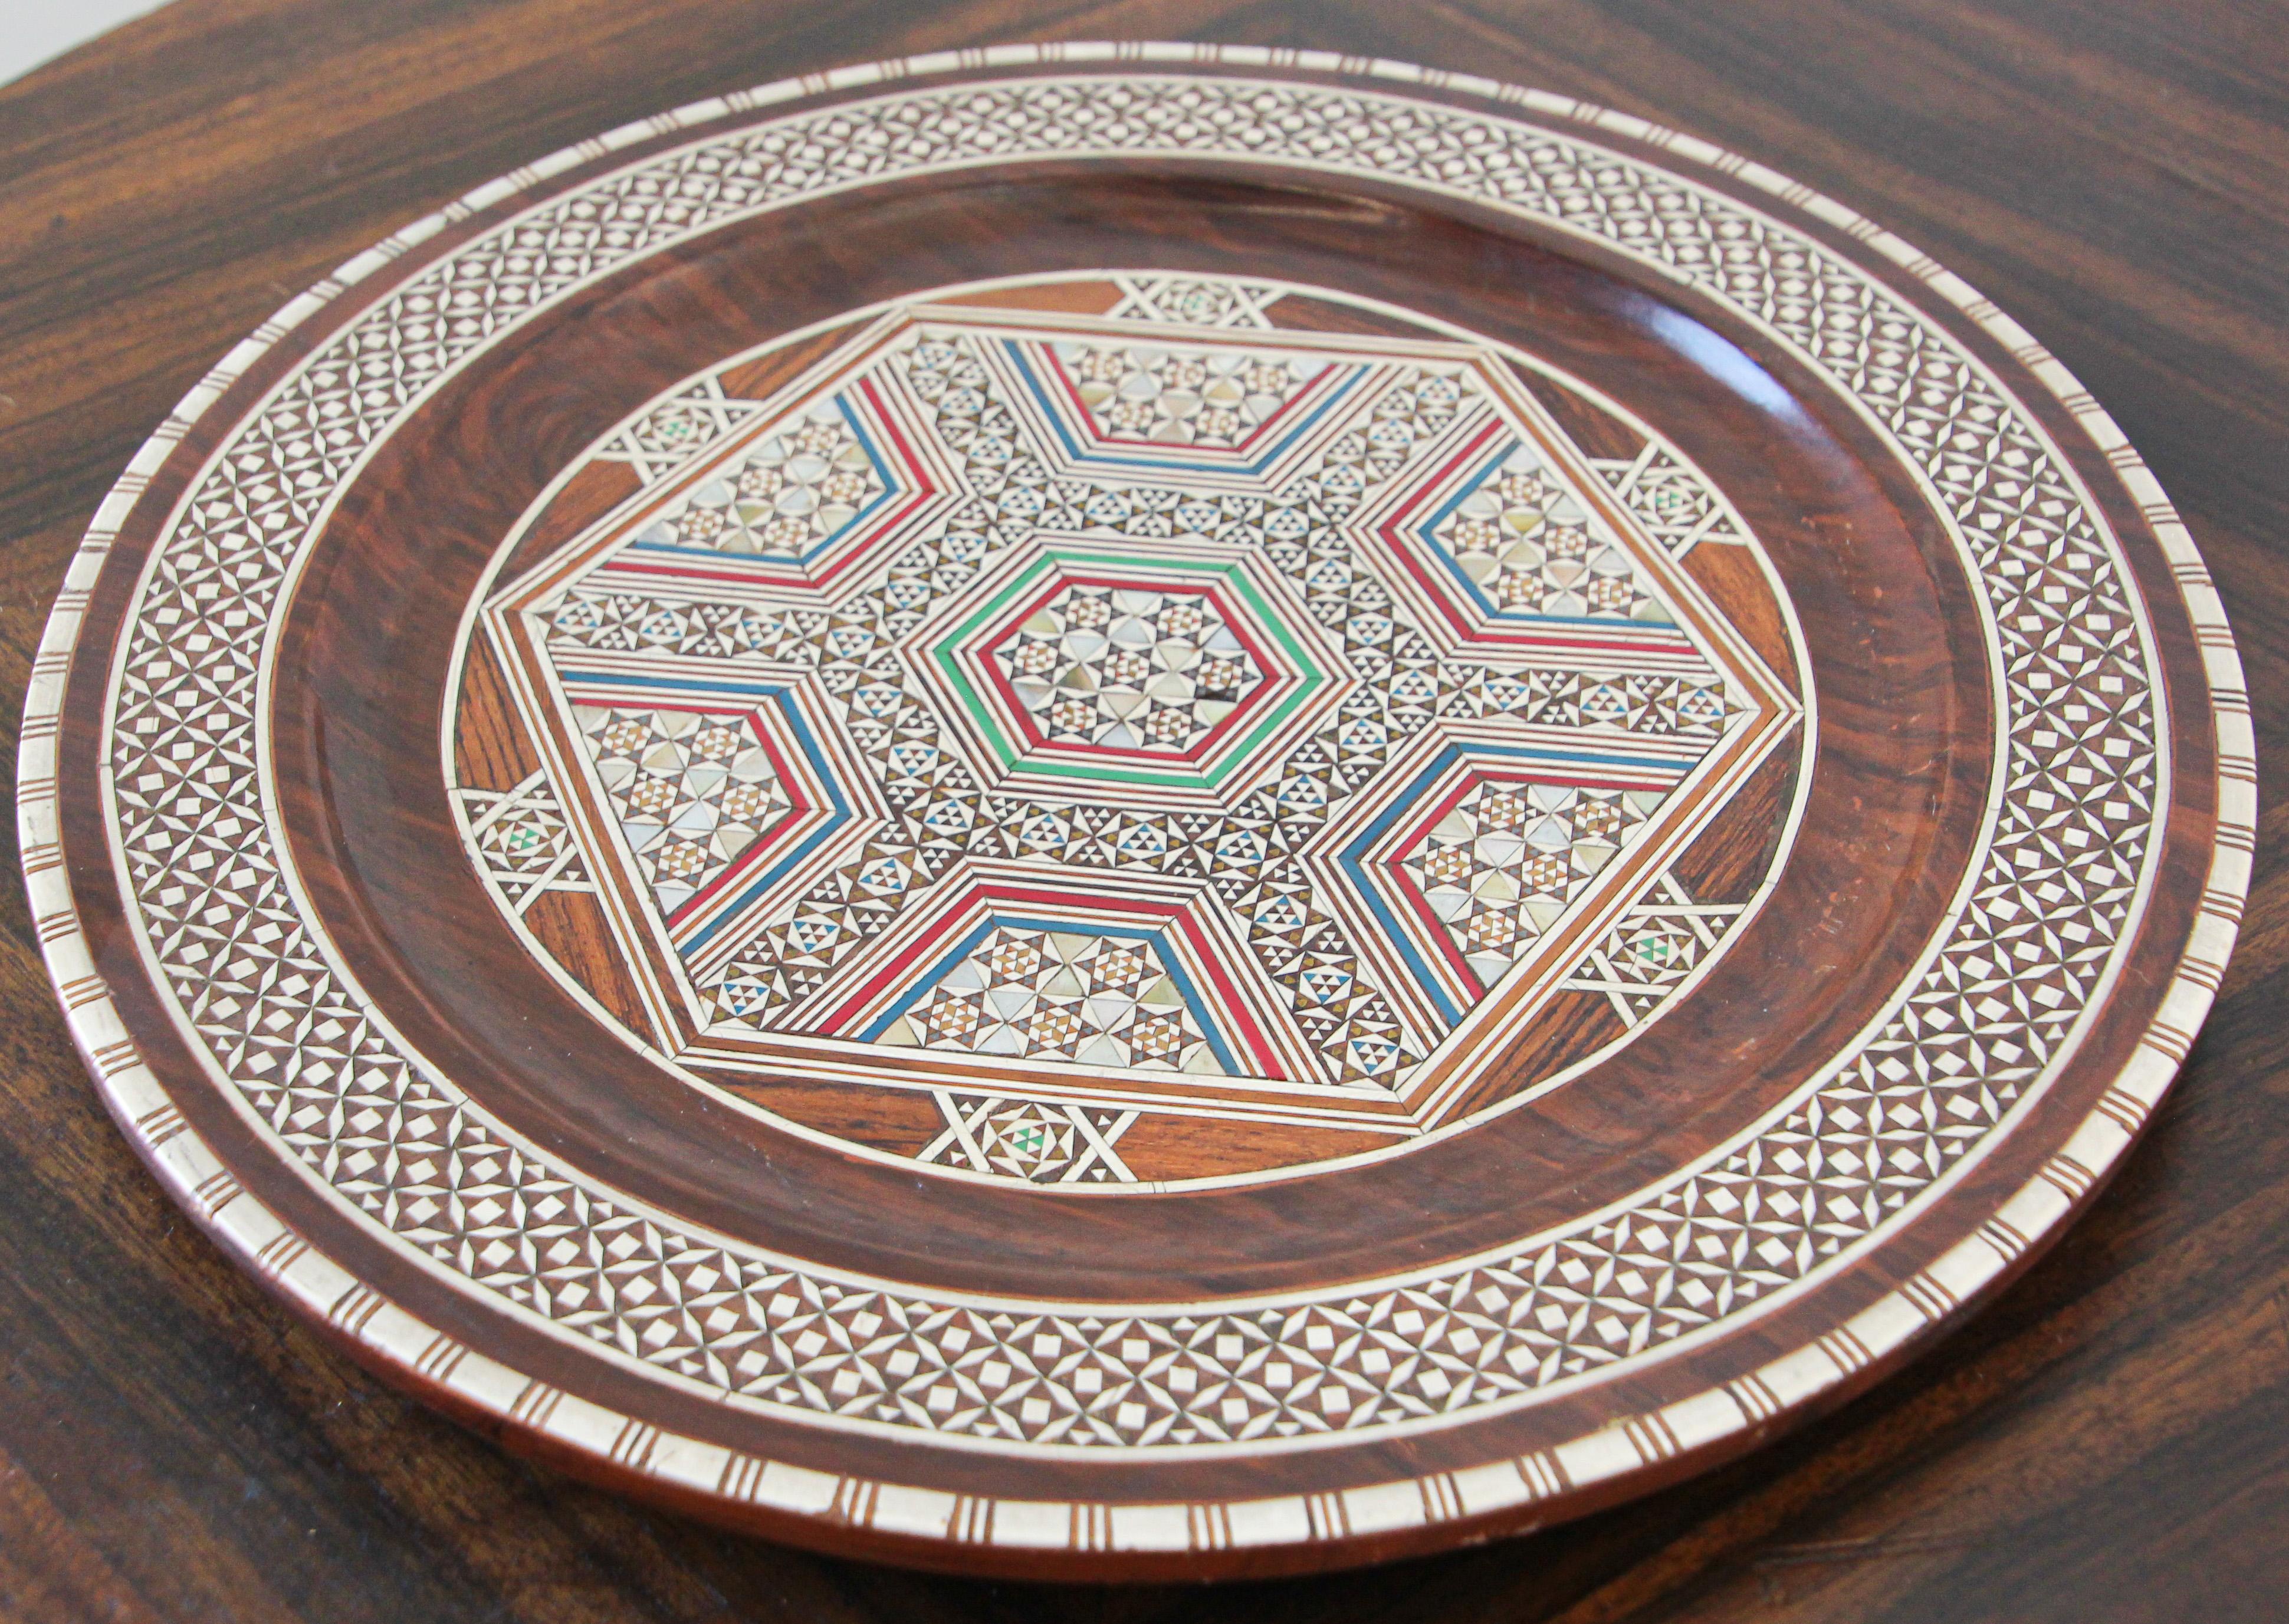 Middle Eastern Moorish decorative plate inlaid with mosaic marquetry.
This beautiful wooden plate with elaborate mosaic marquetry inlay is from Cairo, Egypt.
Great Egyptian style mosaic inlay mosaic marquetry wood decorative serving tray or